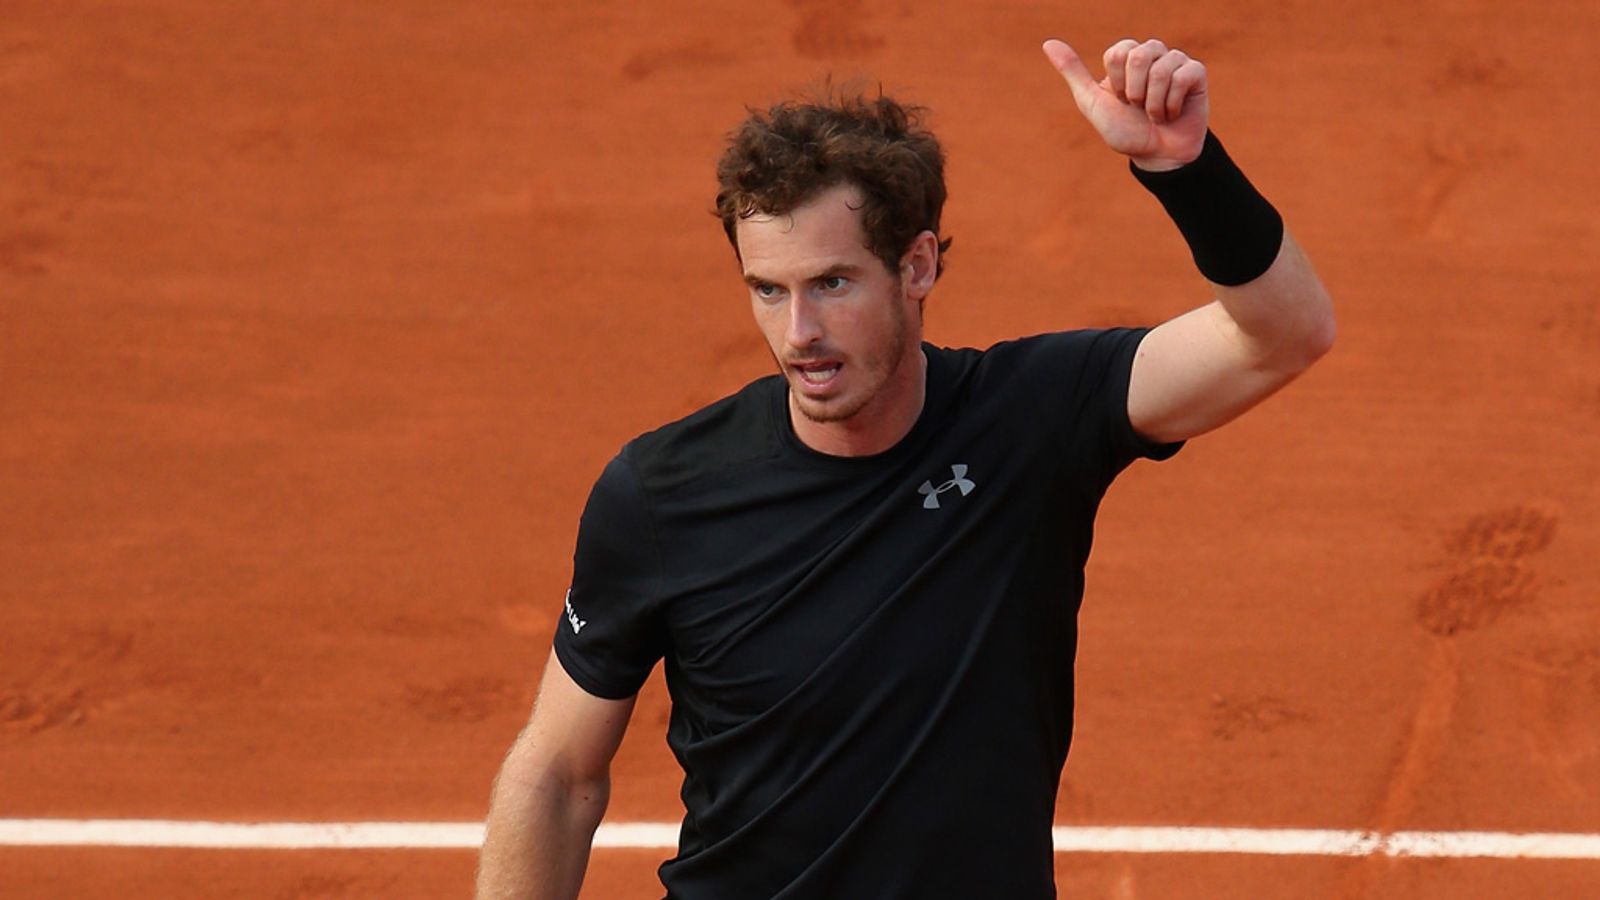 Andy Murray v Nick Kyrgios headlines Saturday at French Open Tennis